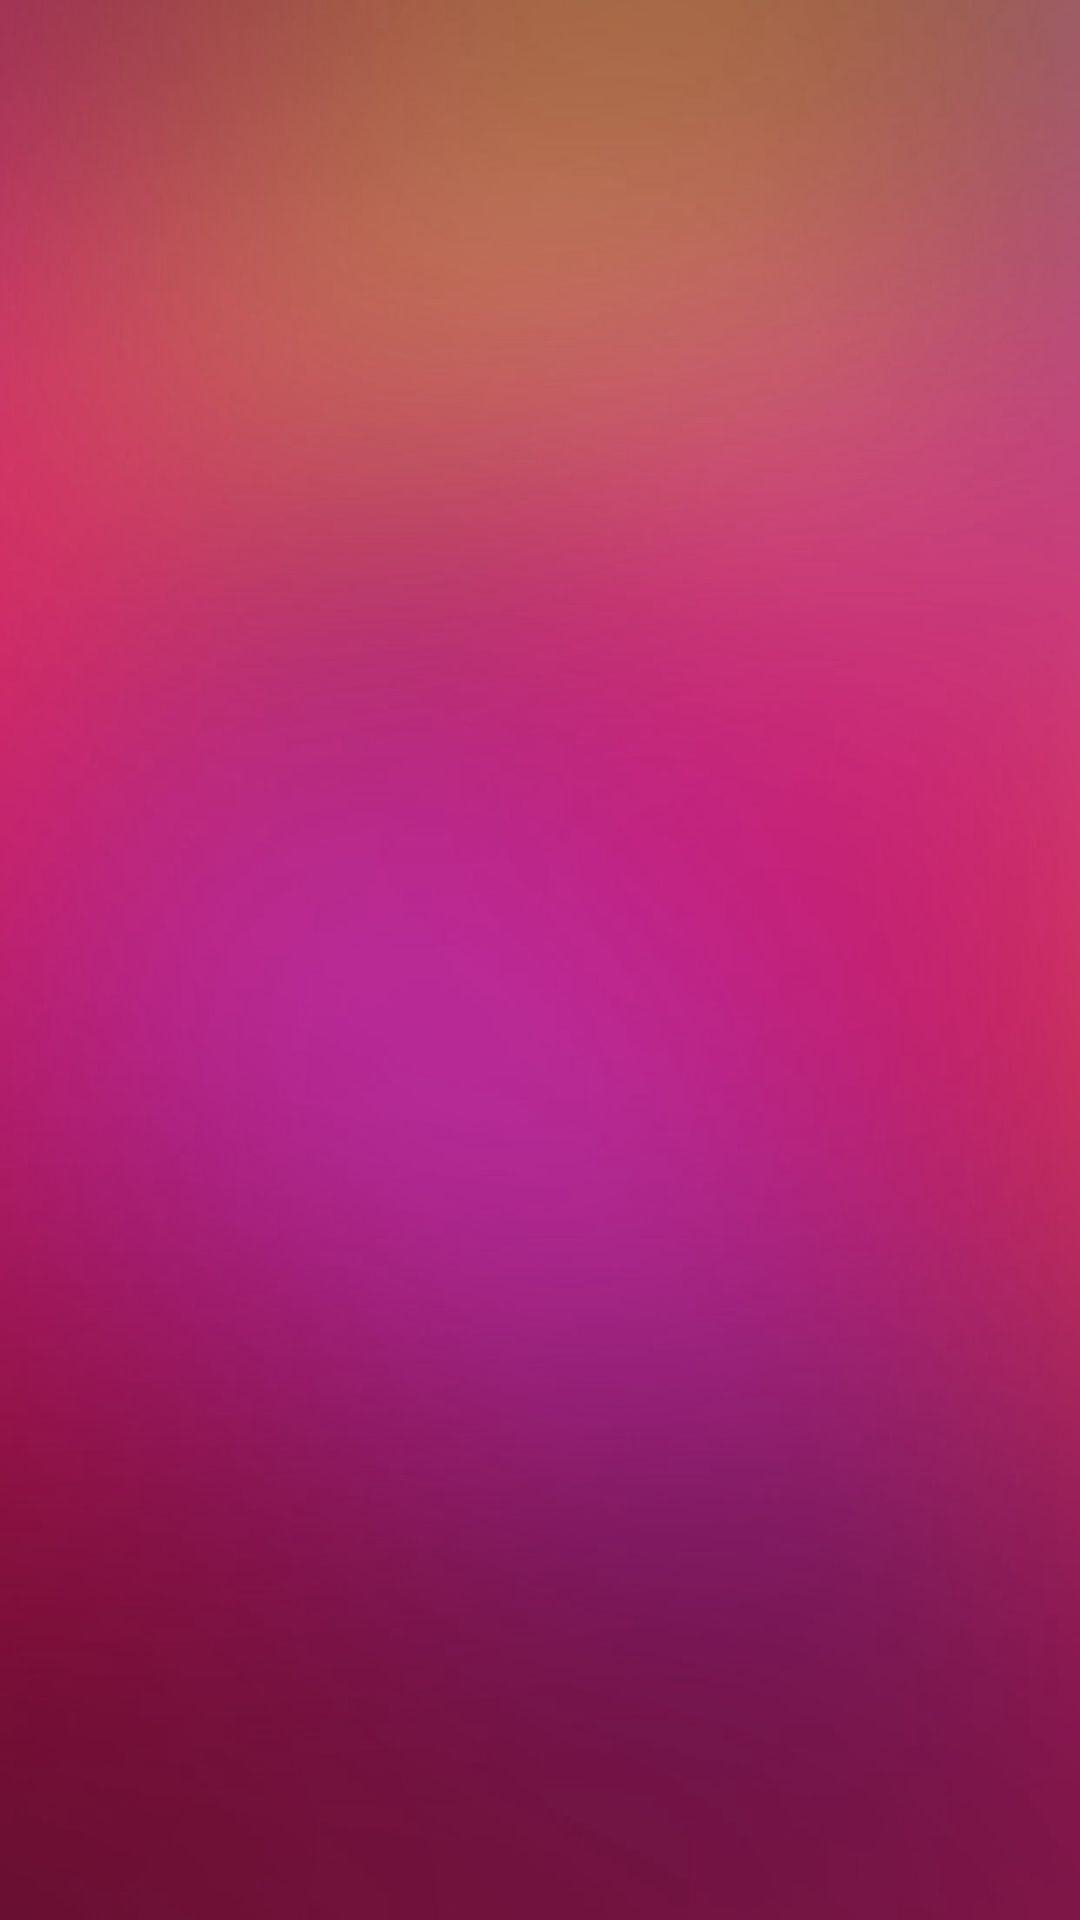 ✓[100+] Hot Pink Red Gradation Blur iPhone 8 Wallpaper Free Download -  Android / iPhone HD Wallpaper Background Download (png / jpg) (2023)